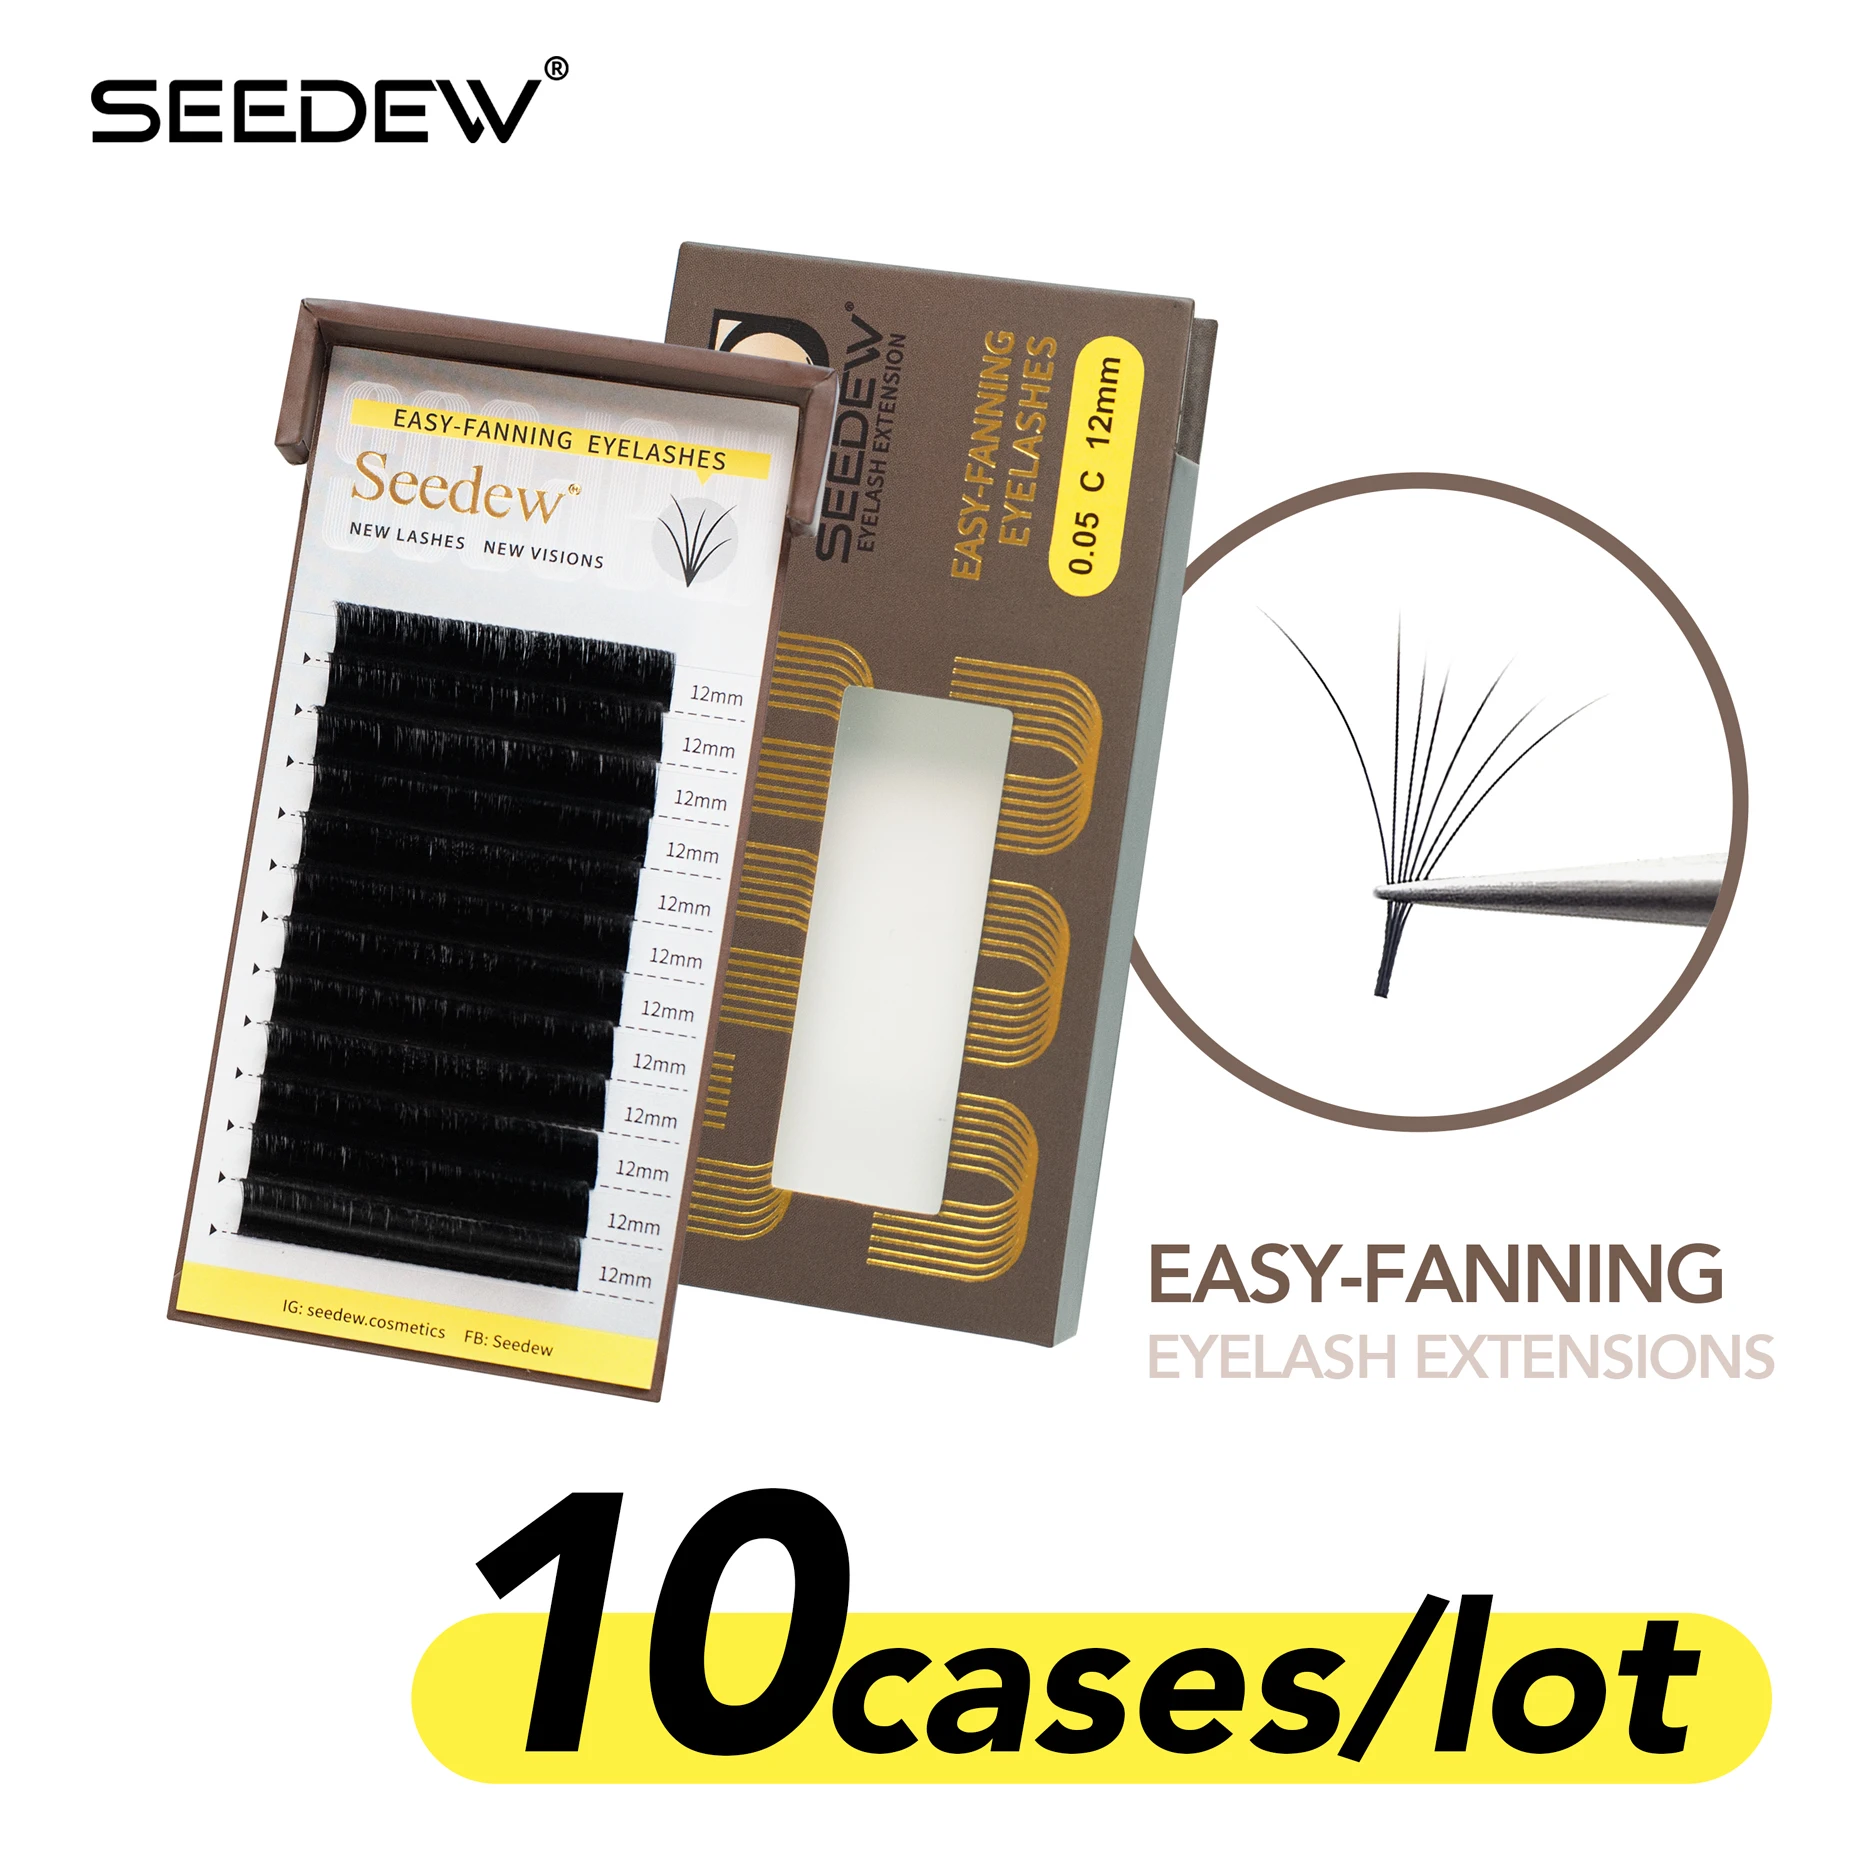 SEEDEW Fast Shipping Easy-fanning Eyelash Extensions 1's Blossom Camellia Individual Lashes Wholesale Bulk 10cases/lot